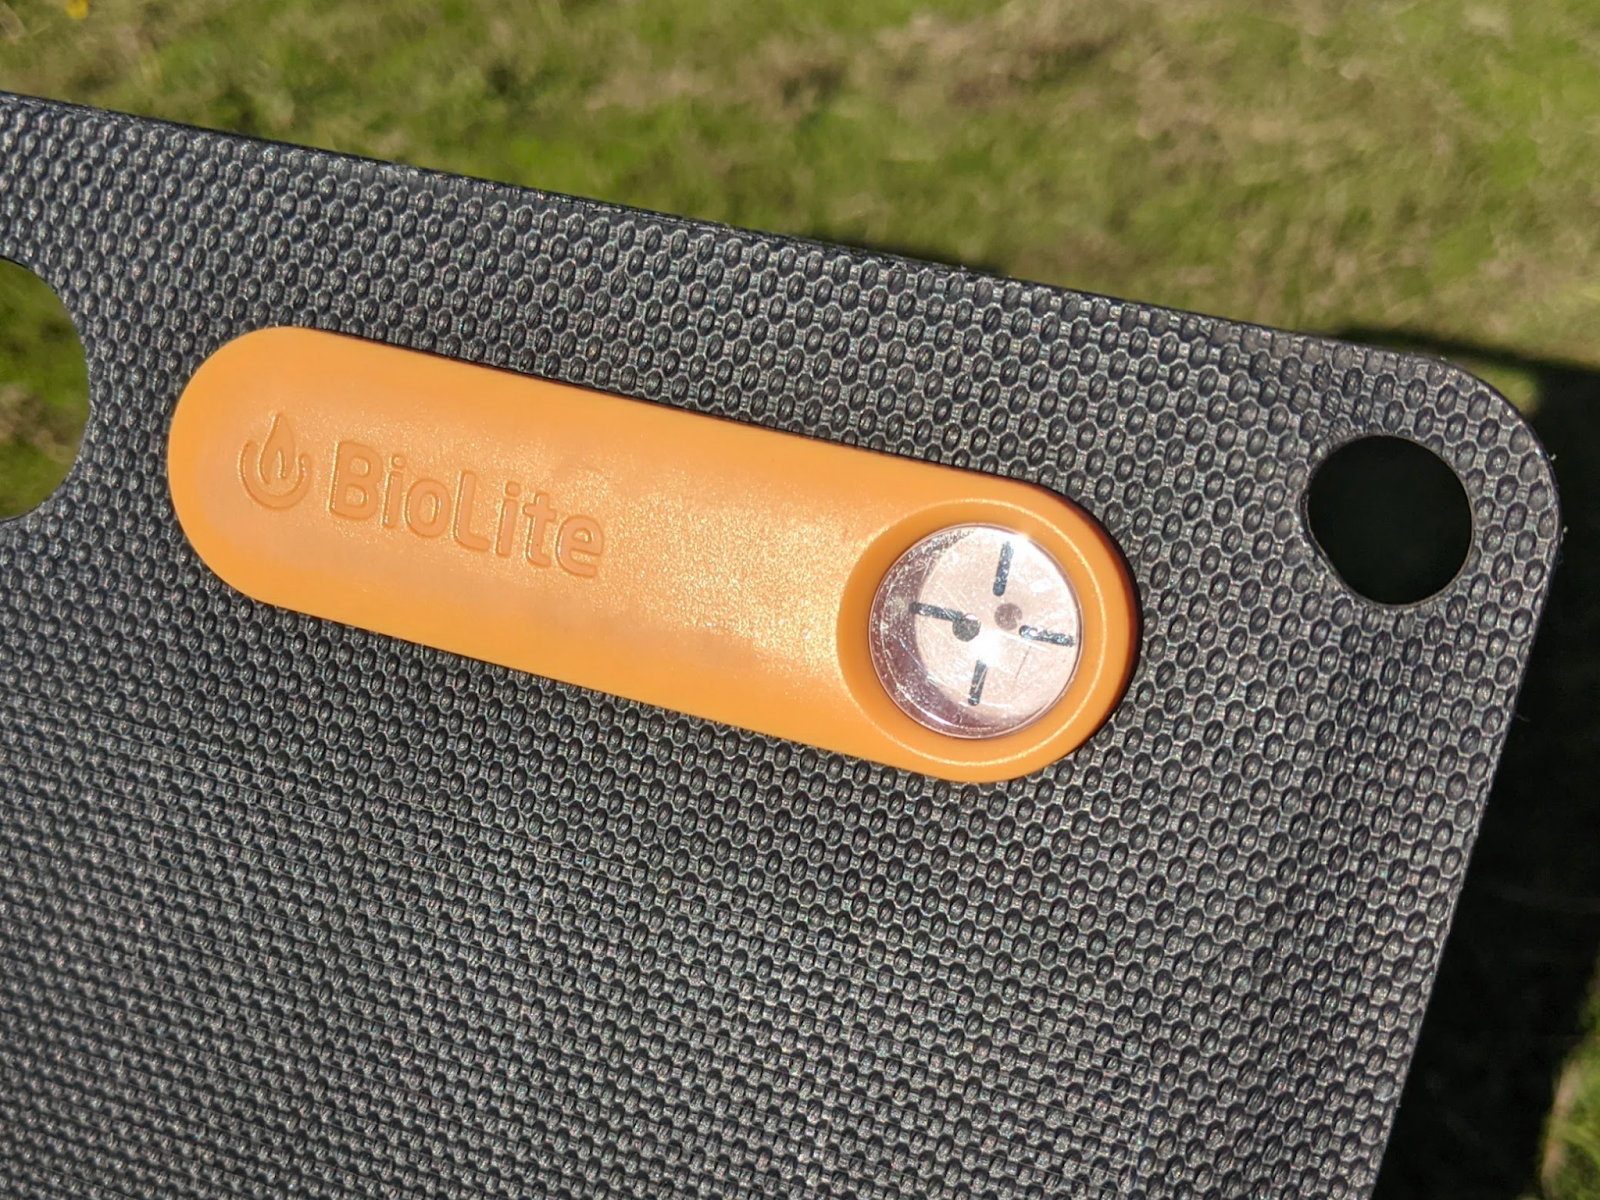 The sun dial on the biolite power bank